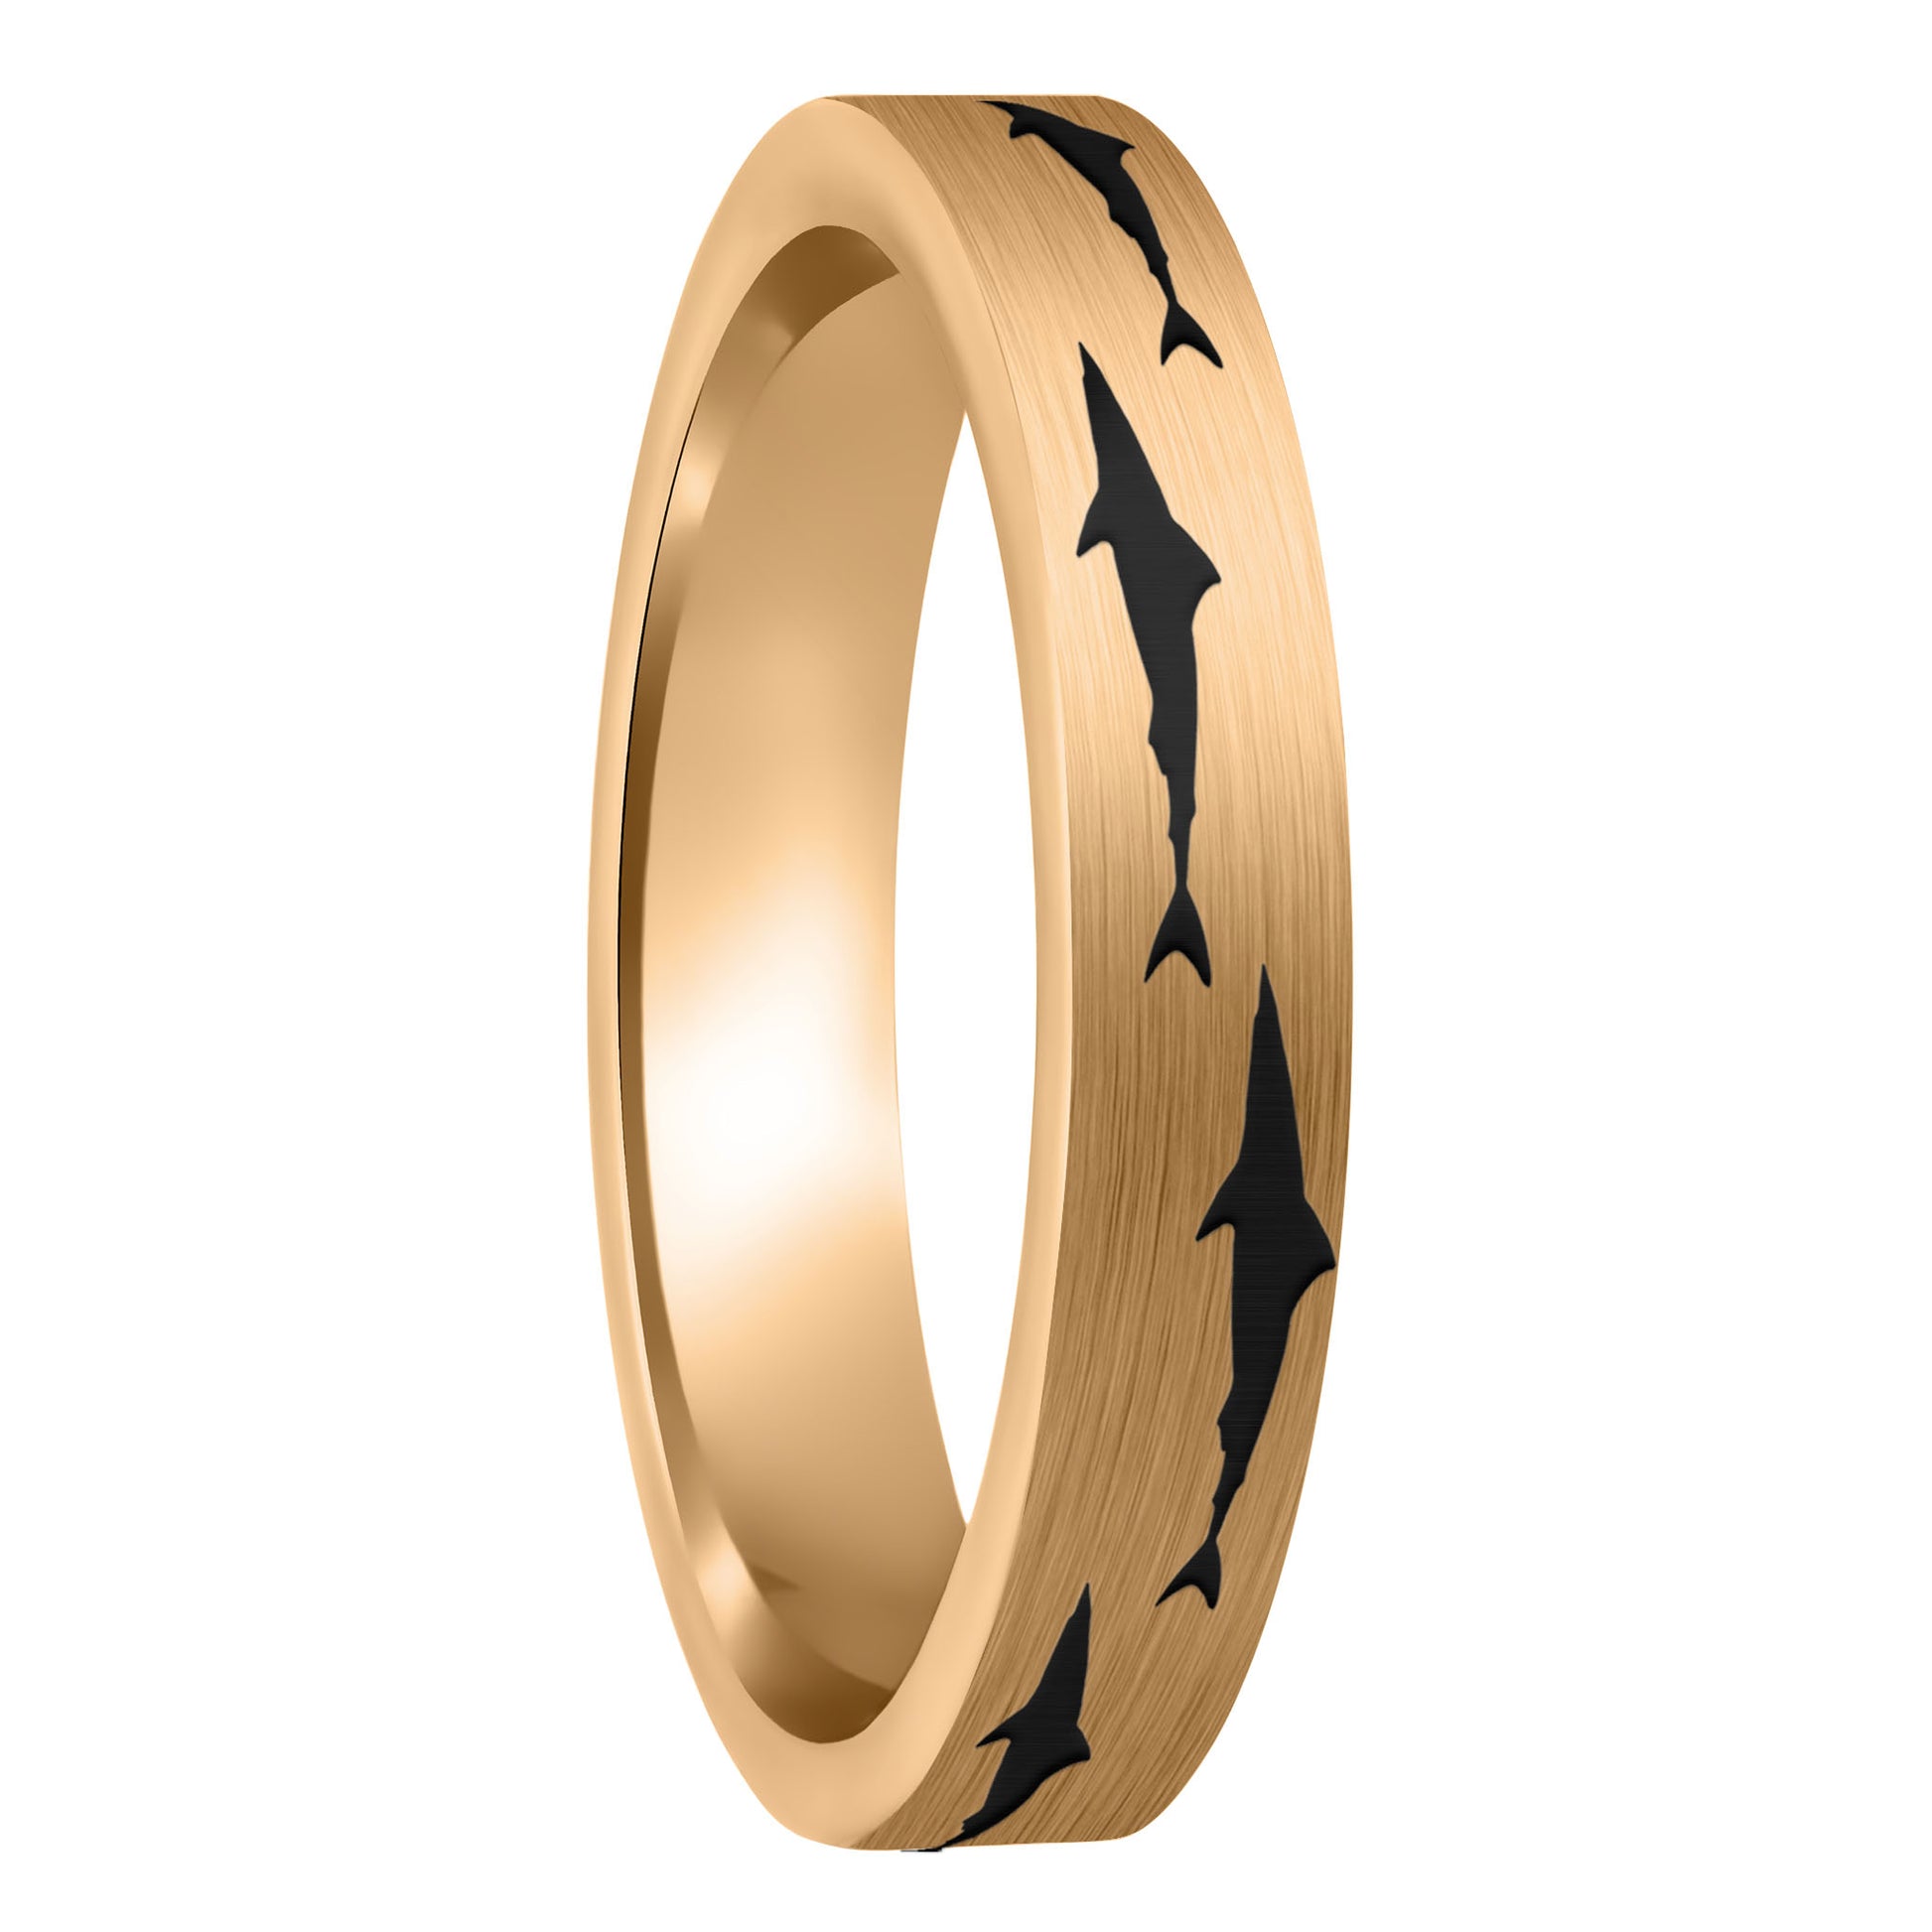 A shark brushed rose gold tungsten women's wedding band displayed on a plain white background.